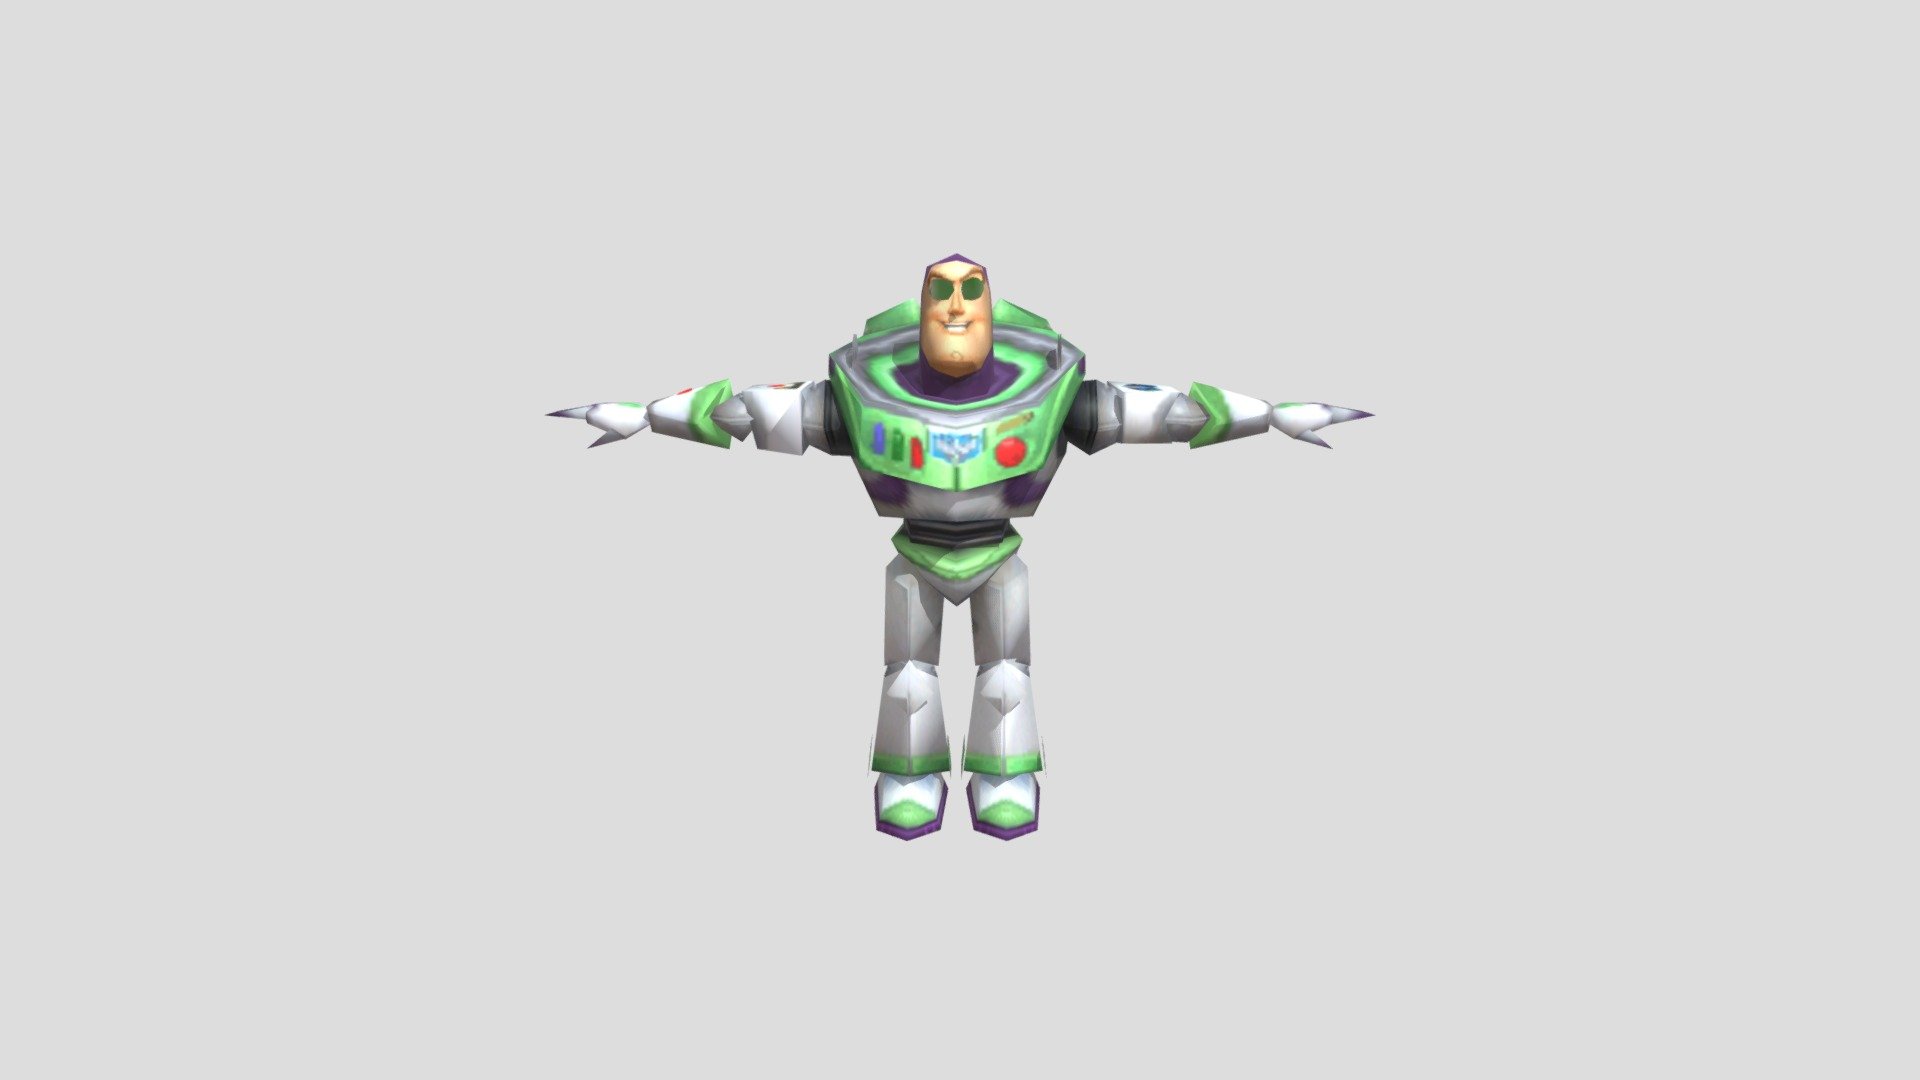 Made on blender.
OBJ, perfect for mixamo 3d model